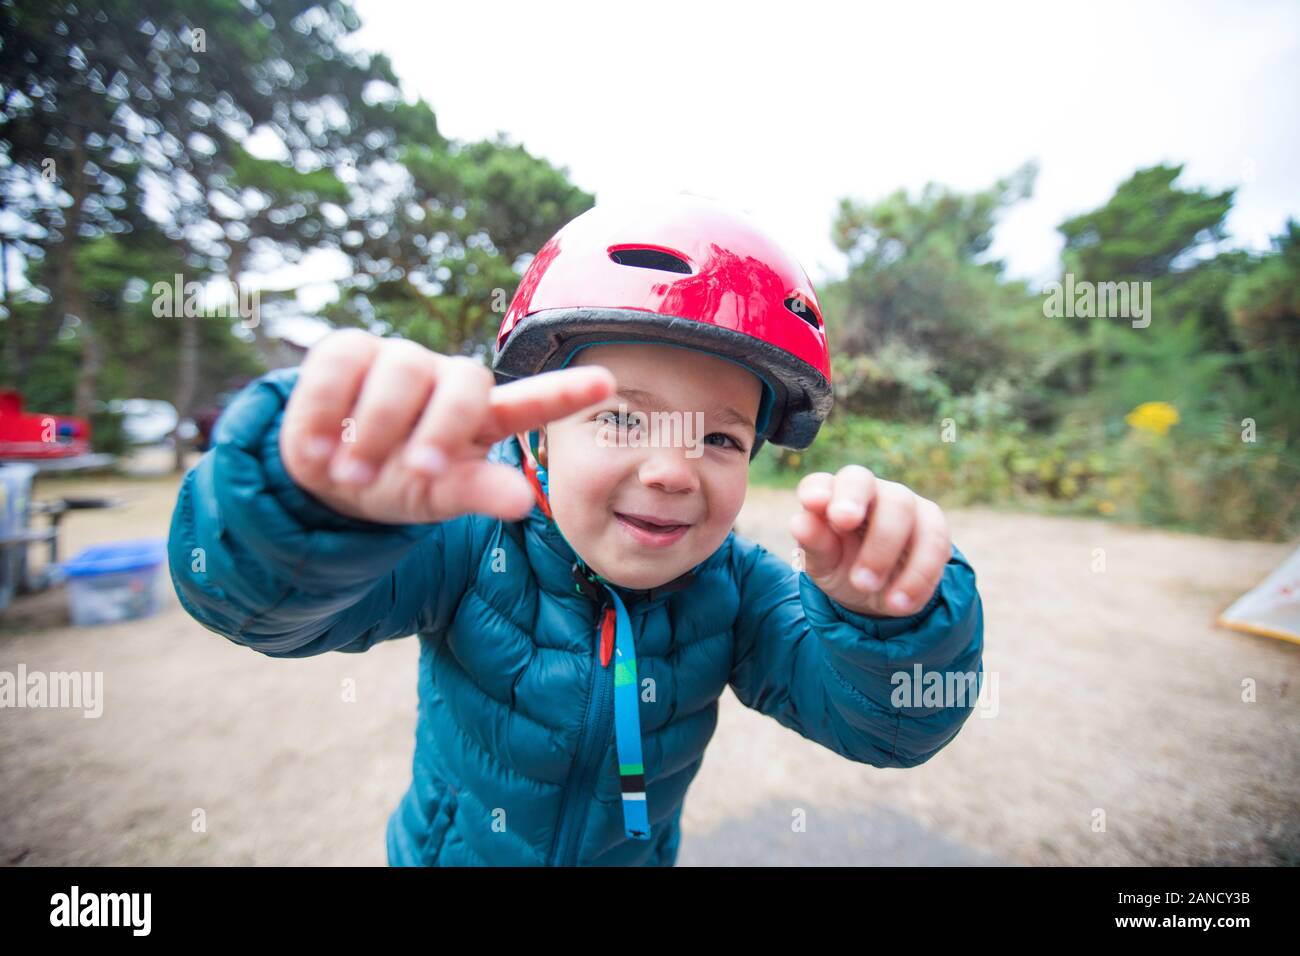 Toddler boy playing outdoors with helmet on. Stock Photo